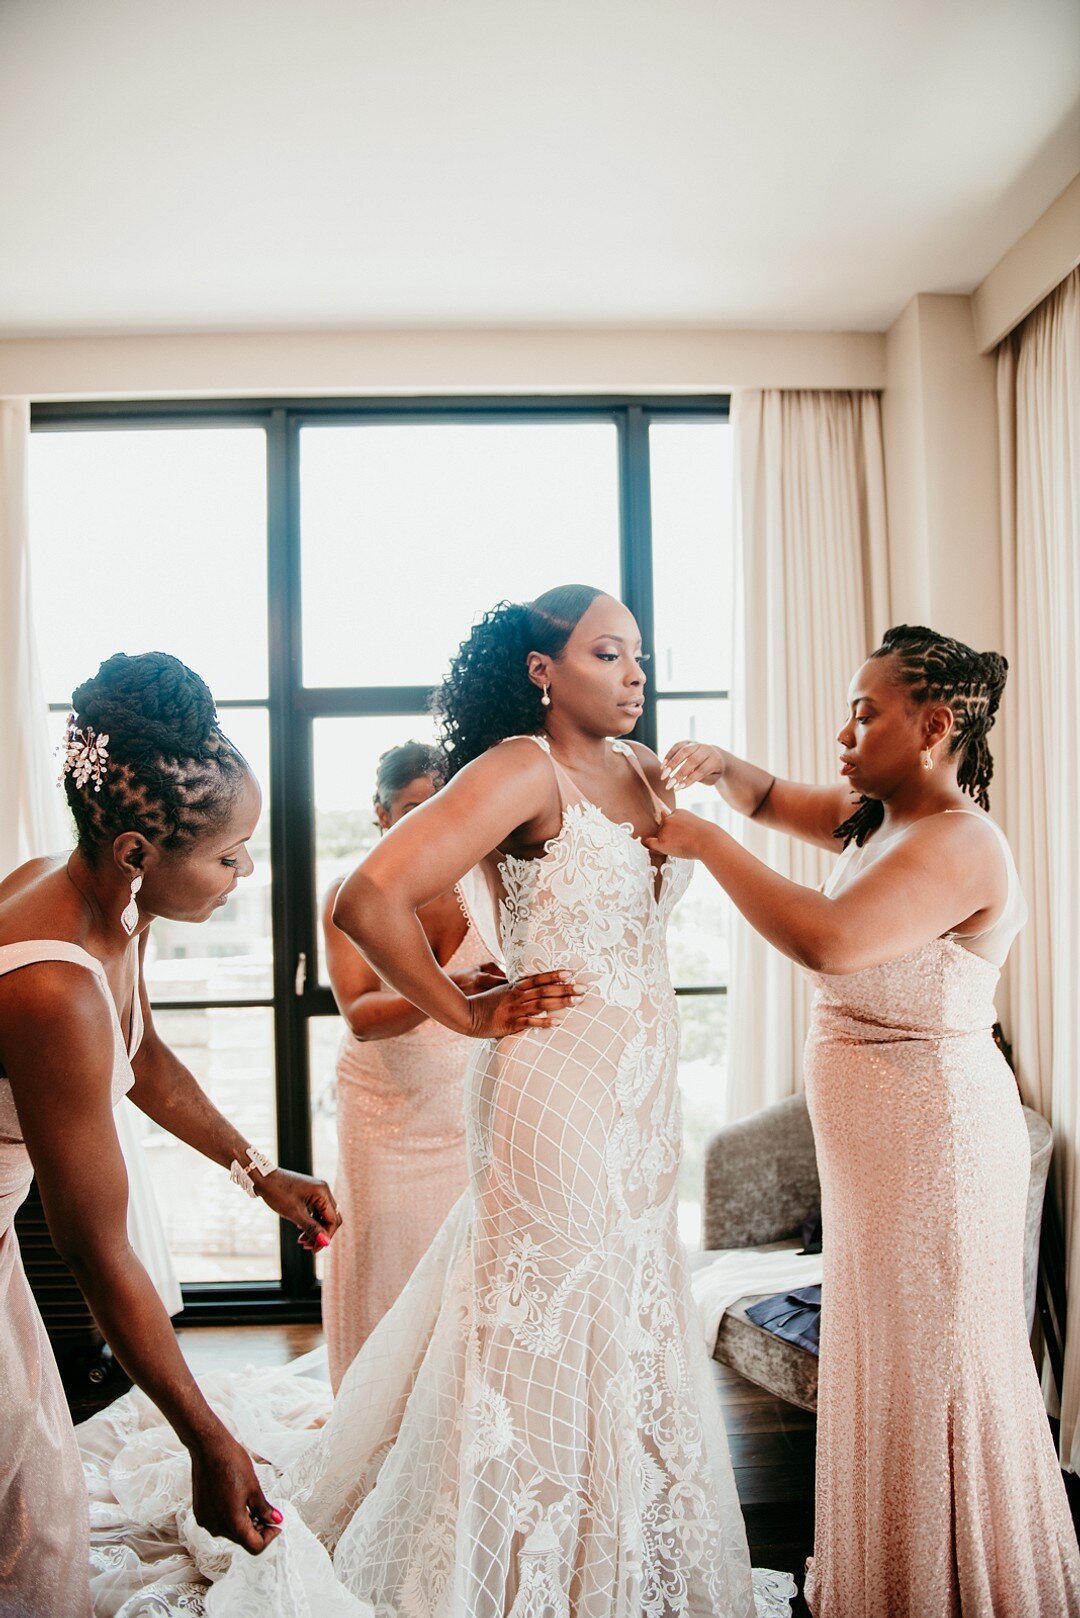 Bridal Party Getting Ready: Sophisticated Southside Chicago wedding captured by Emily-Melissa Photography LLC featured on CHI thee WED. Find more Chicago wedding ideas on CHItheeWED.com!